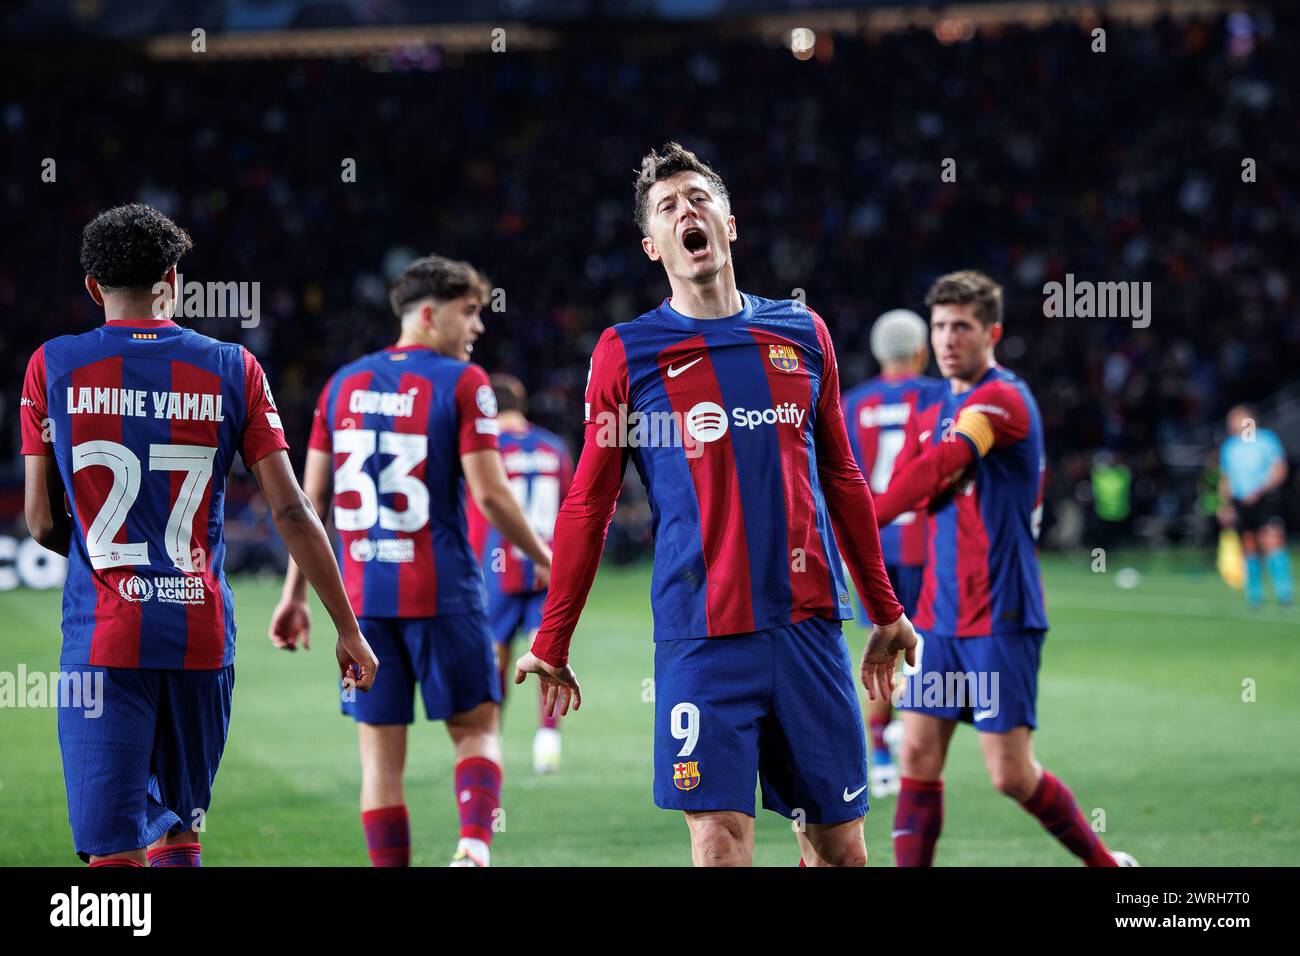 Barcelona, Spain. 12th Mar, 2024. Lewandowski celebrates after scoring a goal during the Uefa Champions League match between FC Barcelona and SSC Napoli at the Estadi Olimpic Lluis Companys in Barcelona, Spain. Credit: Christian Bertrand/Alamy Live News Stock Photo